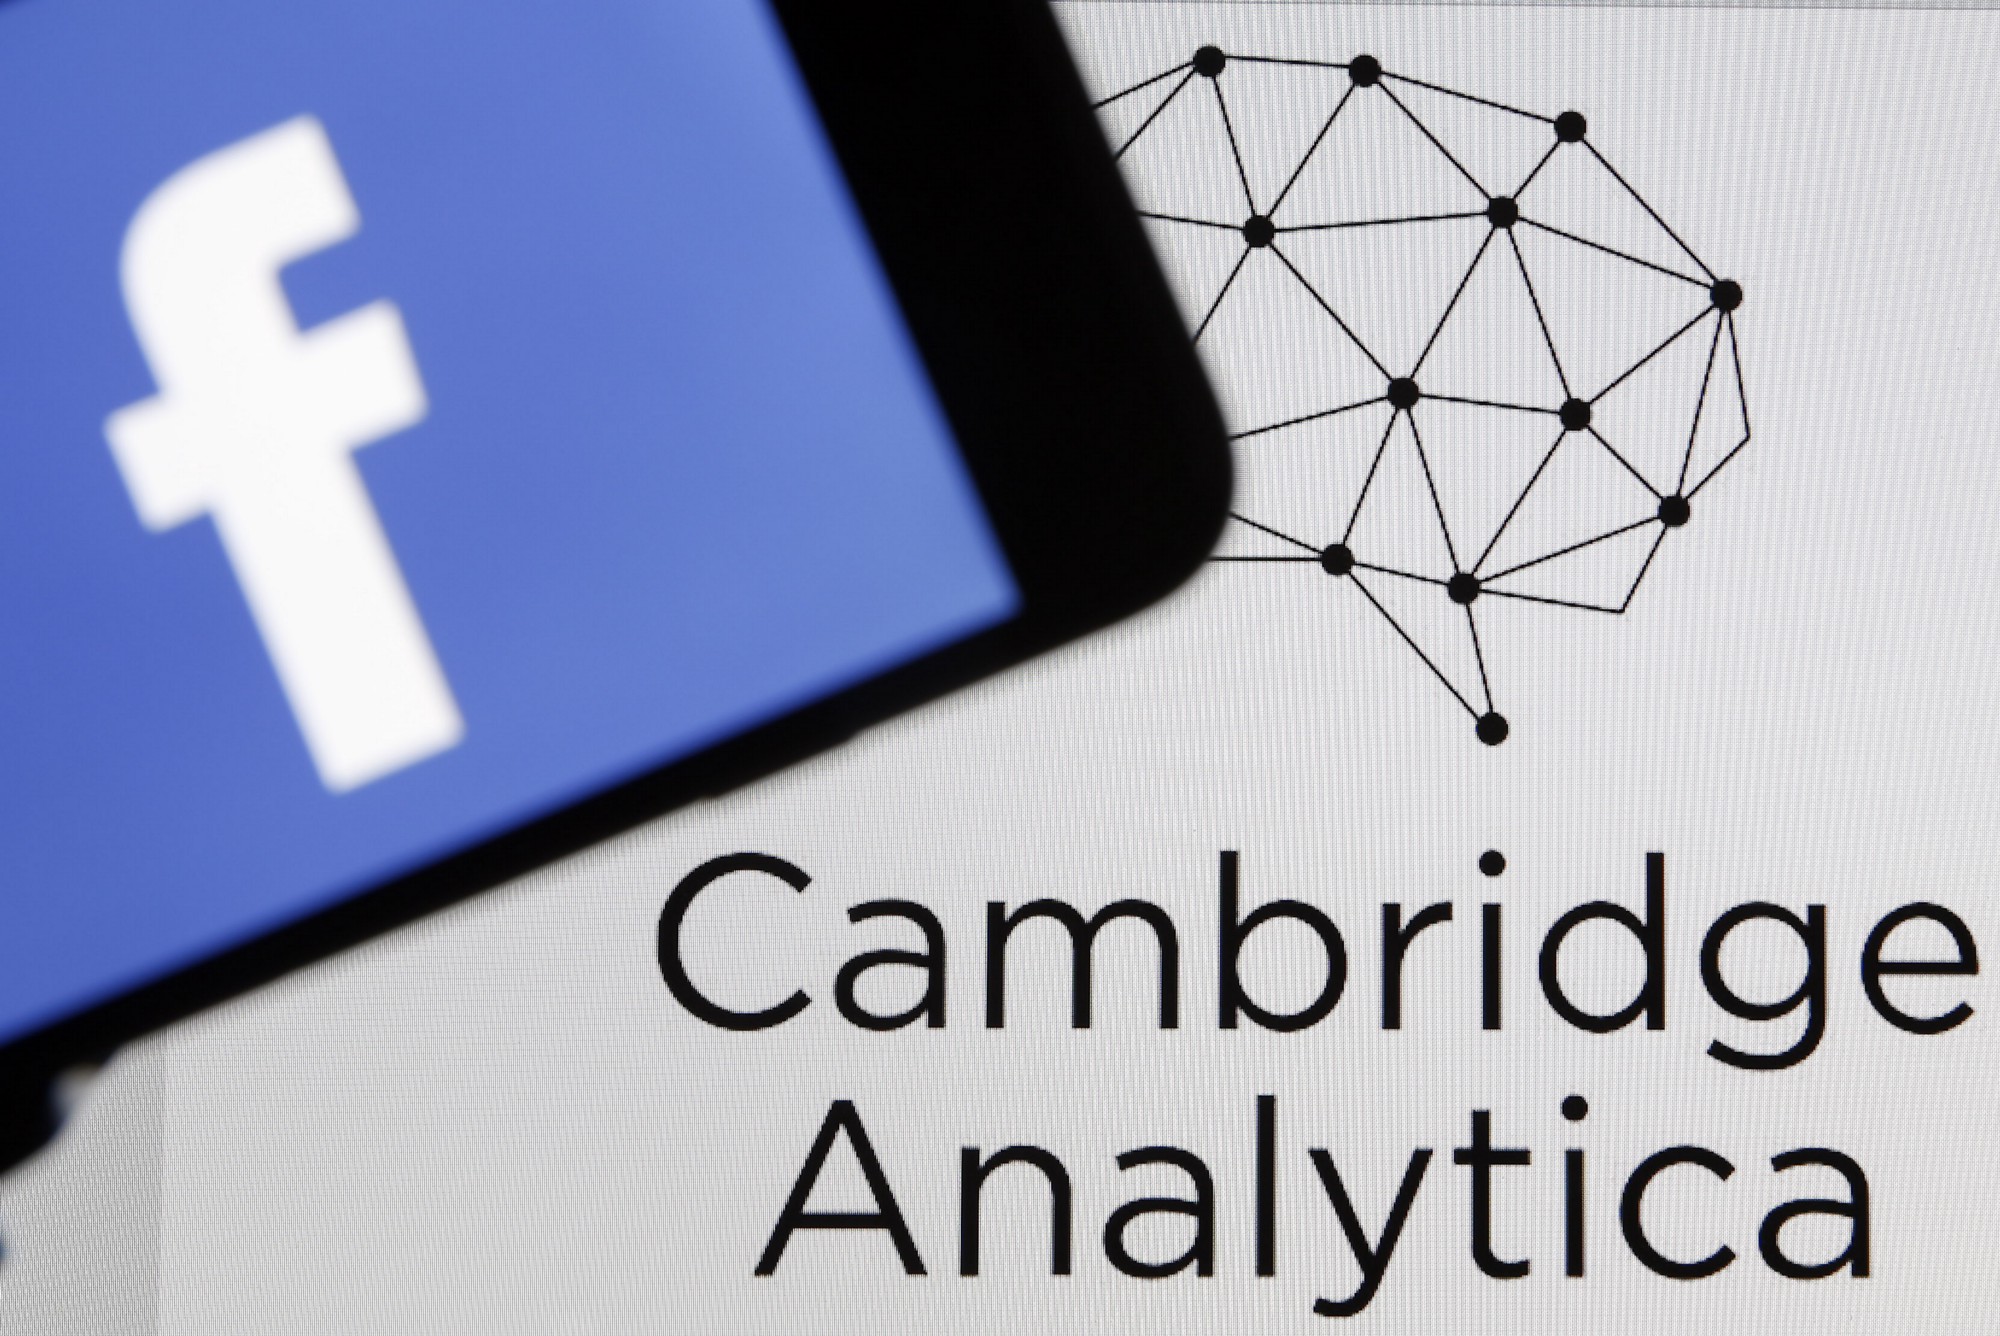 The scandal over the illegal use of user data by Facebook and Cambridge Analytica